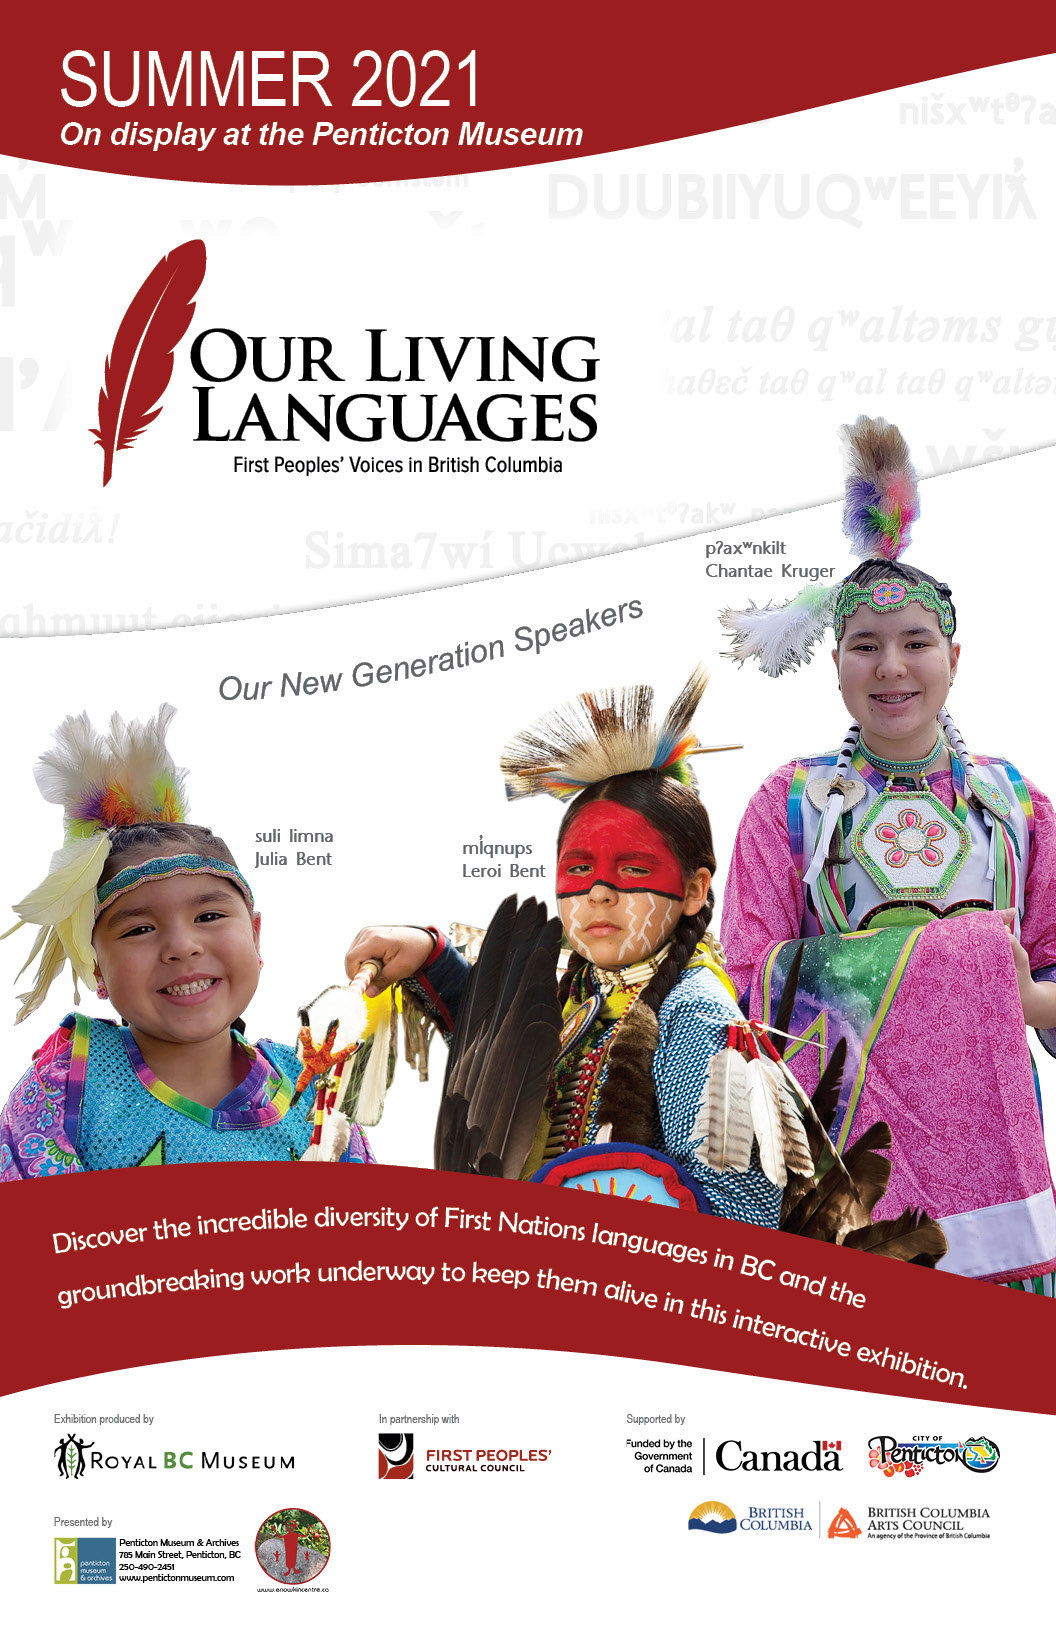 Our Living Languages - image